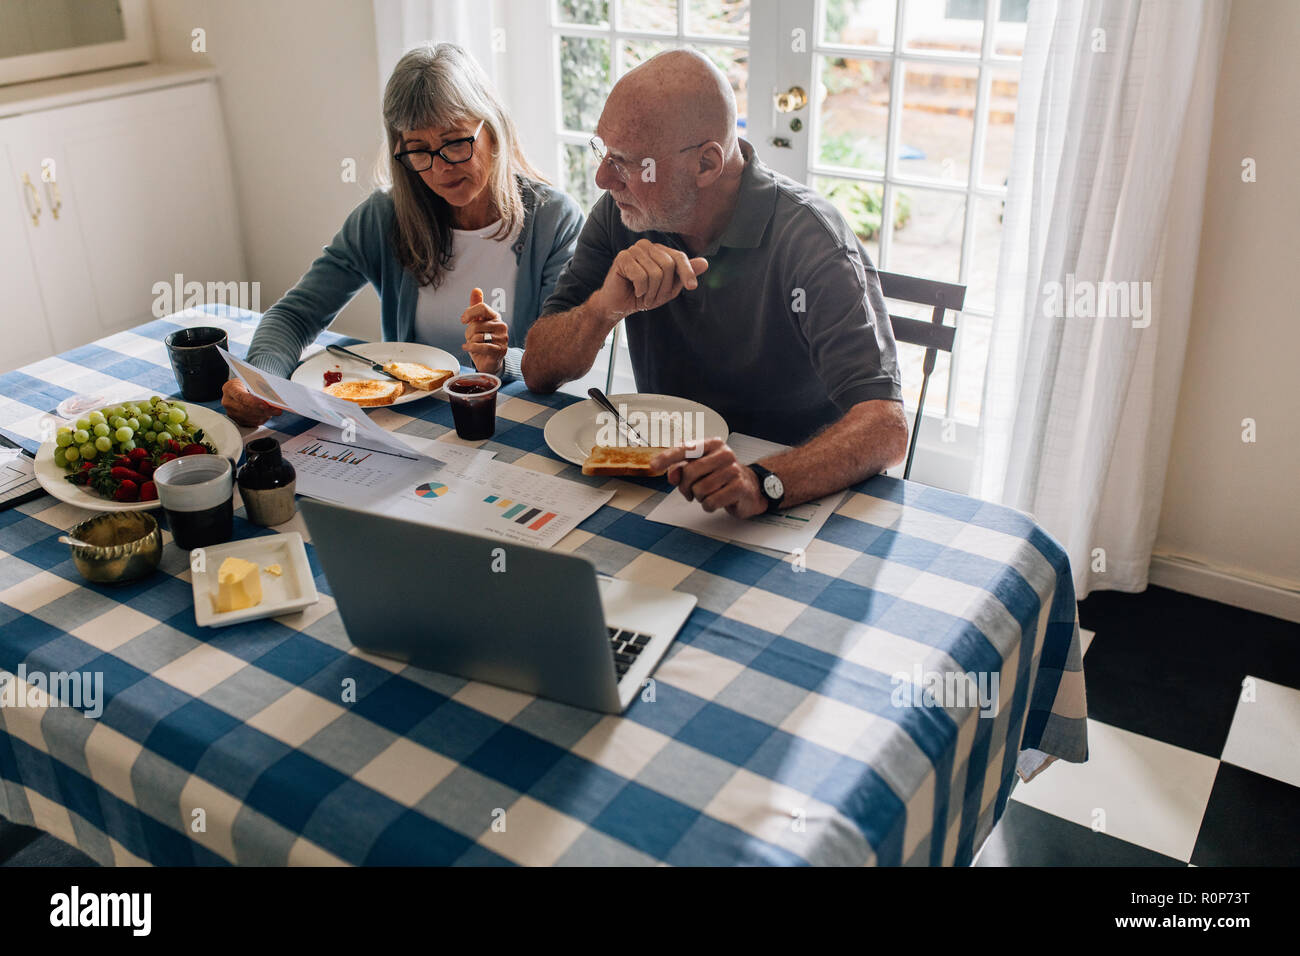 Senior man and woman having breakfast together at home with a laptop and papers on the table. Woman holding a paper discussing finances with her husba Stock Photo